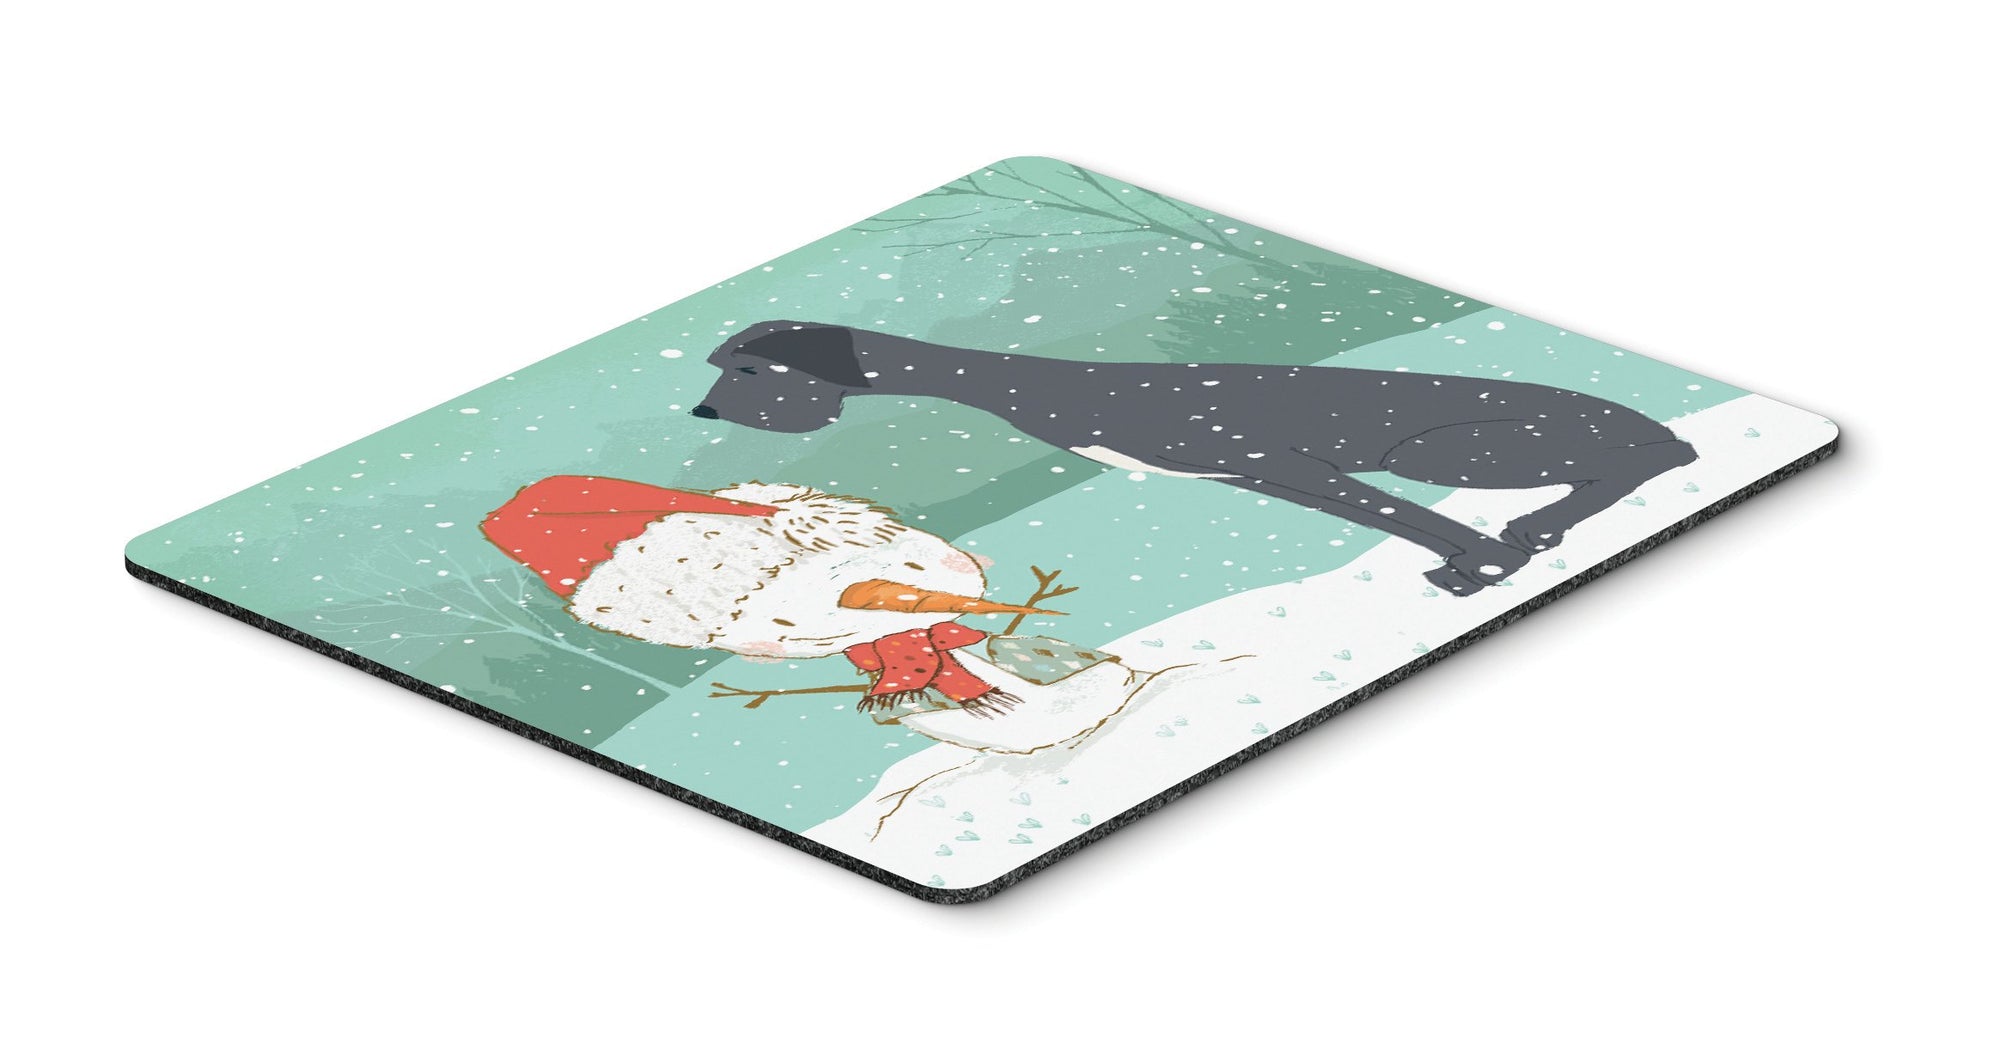 Black Great Dane and Snowman Christmas Mouse Pad, Hot Pad or Trivet CK2039MP by Caroline's Treasures